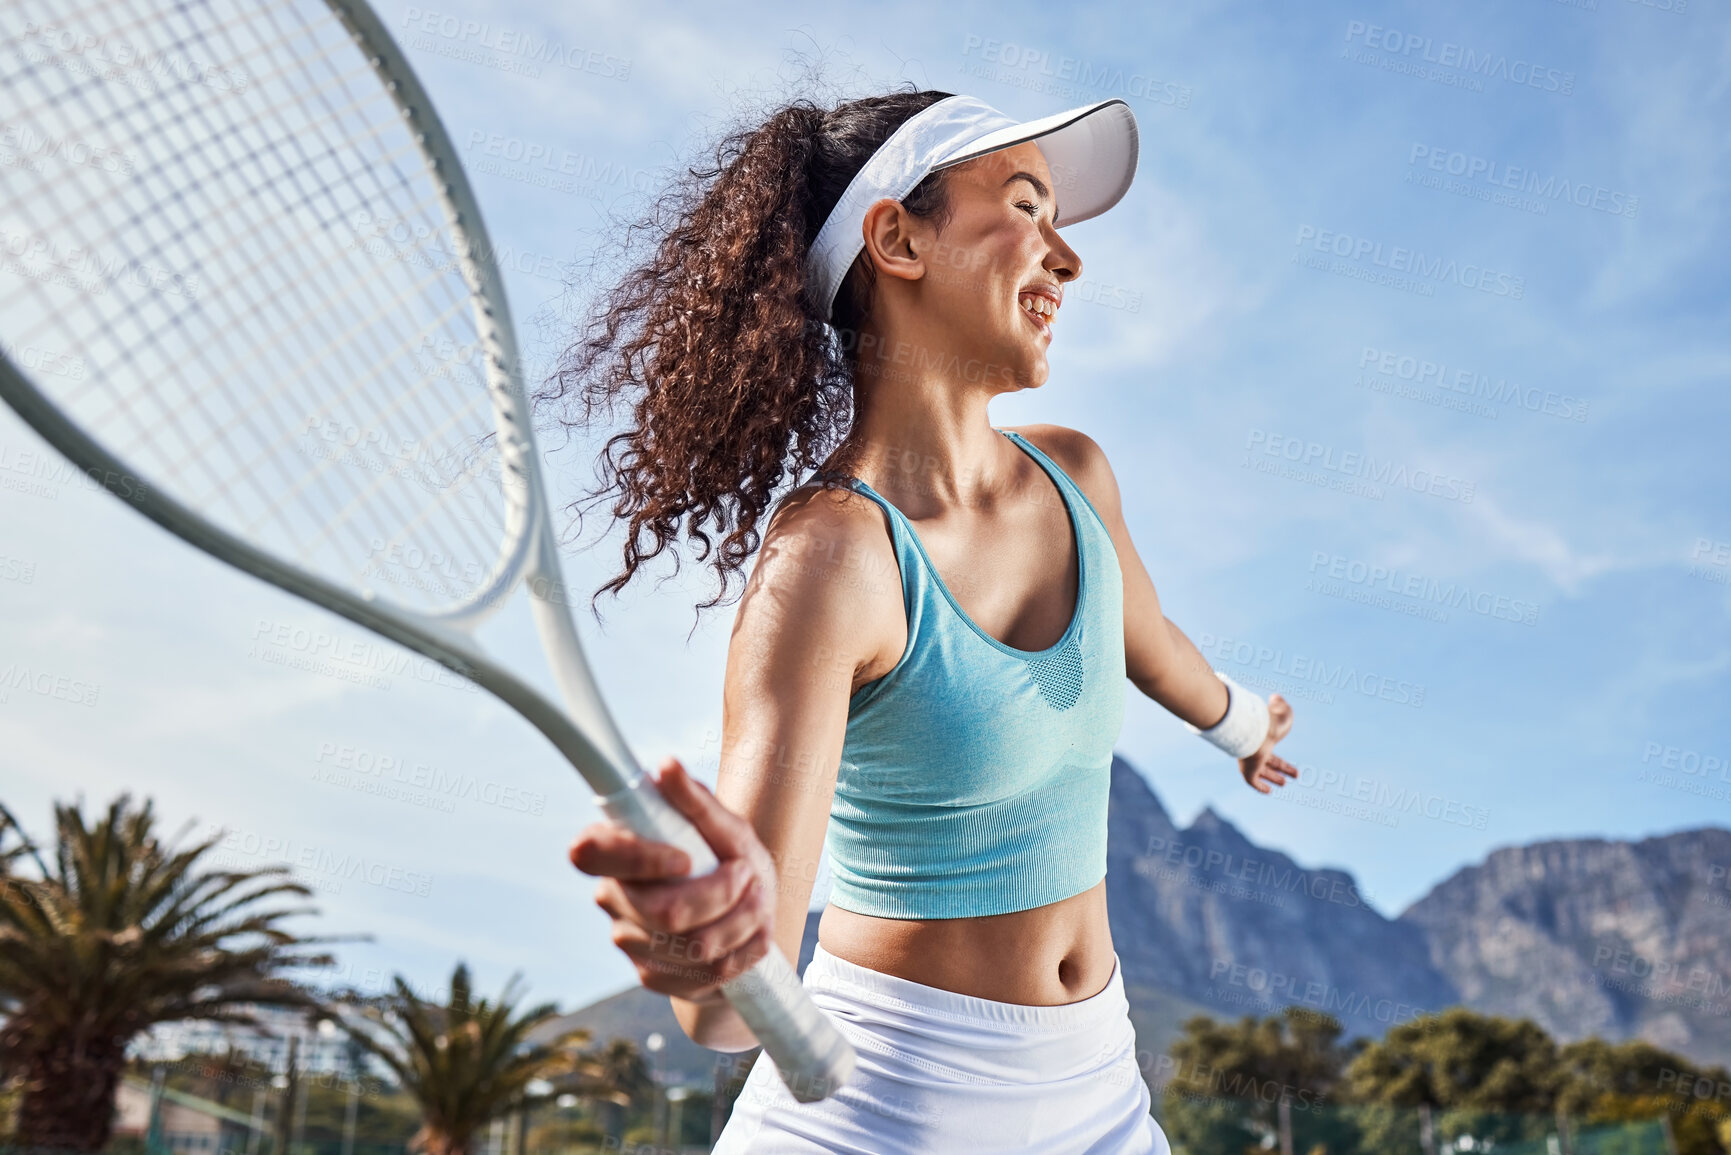 Buy stock photo Shot of an attractive young woman standing alone and getting ready to hit the ball during a game of tennis